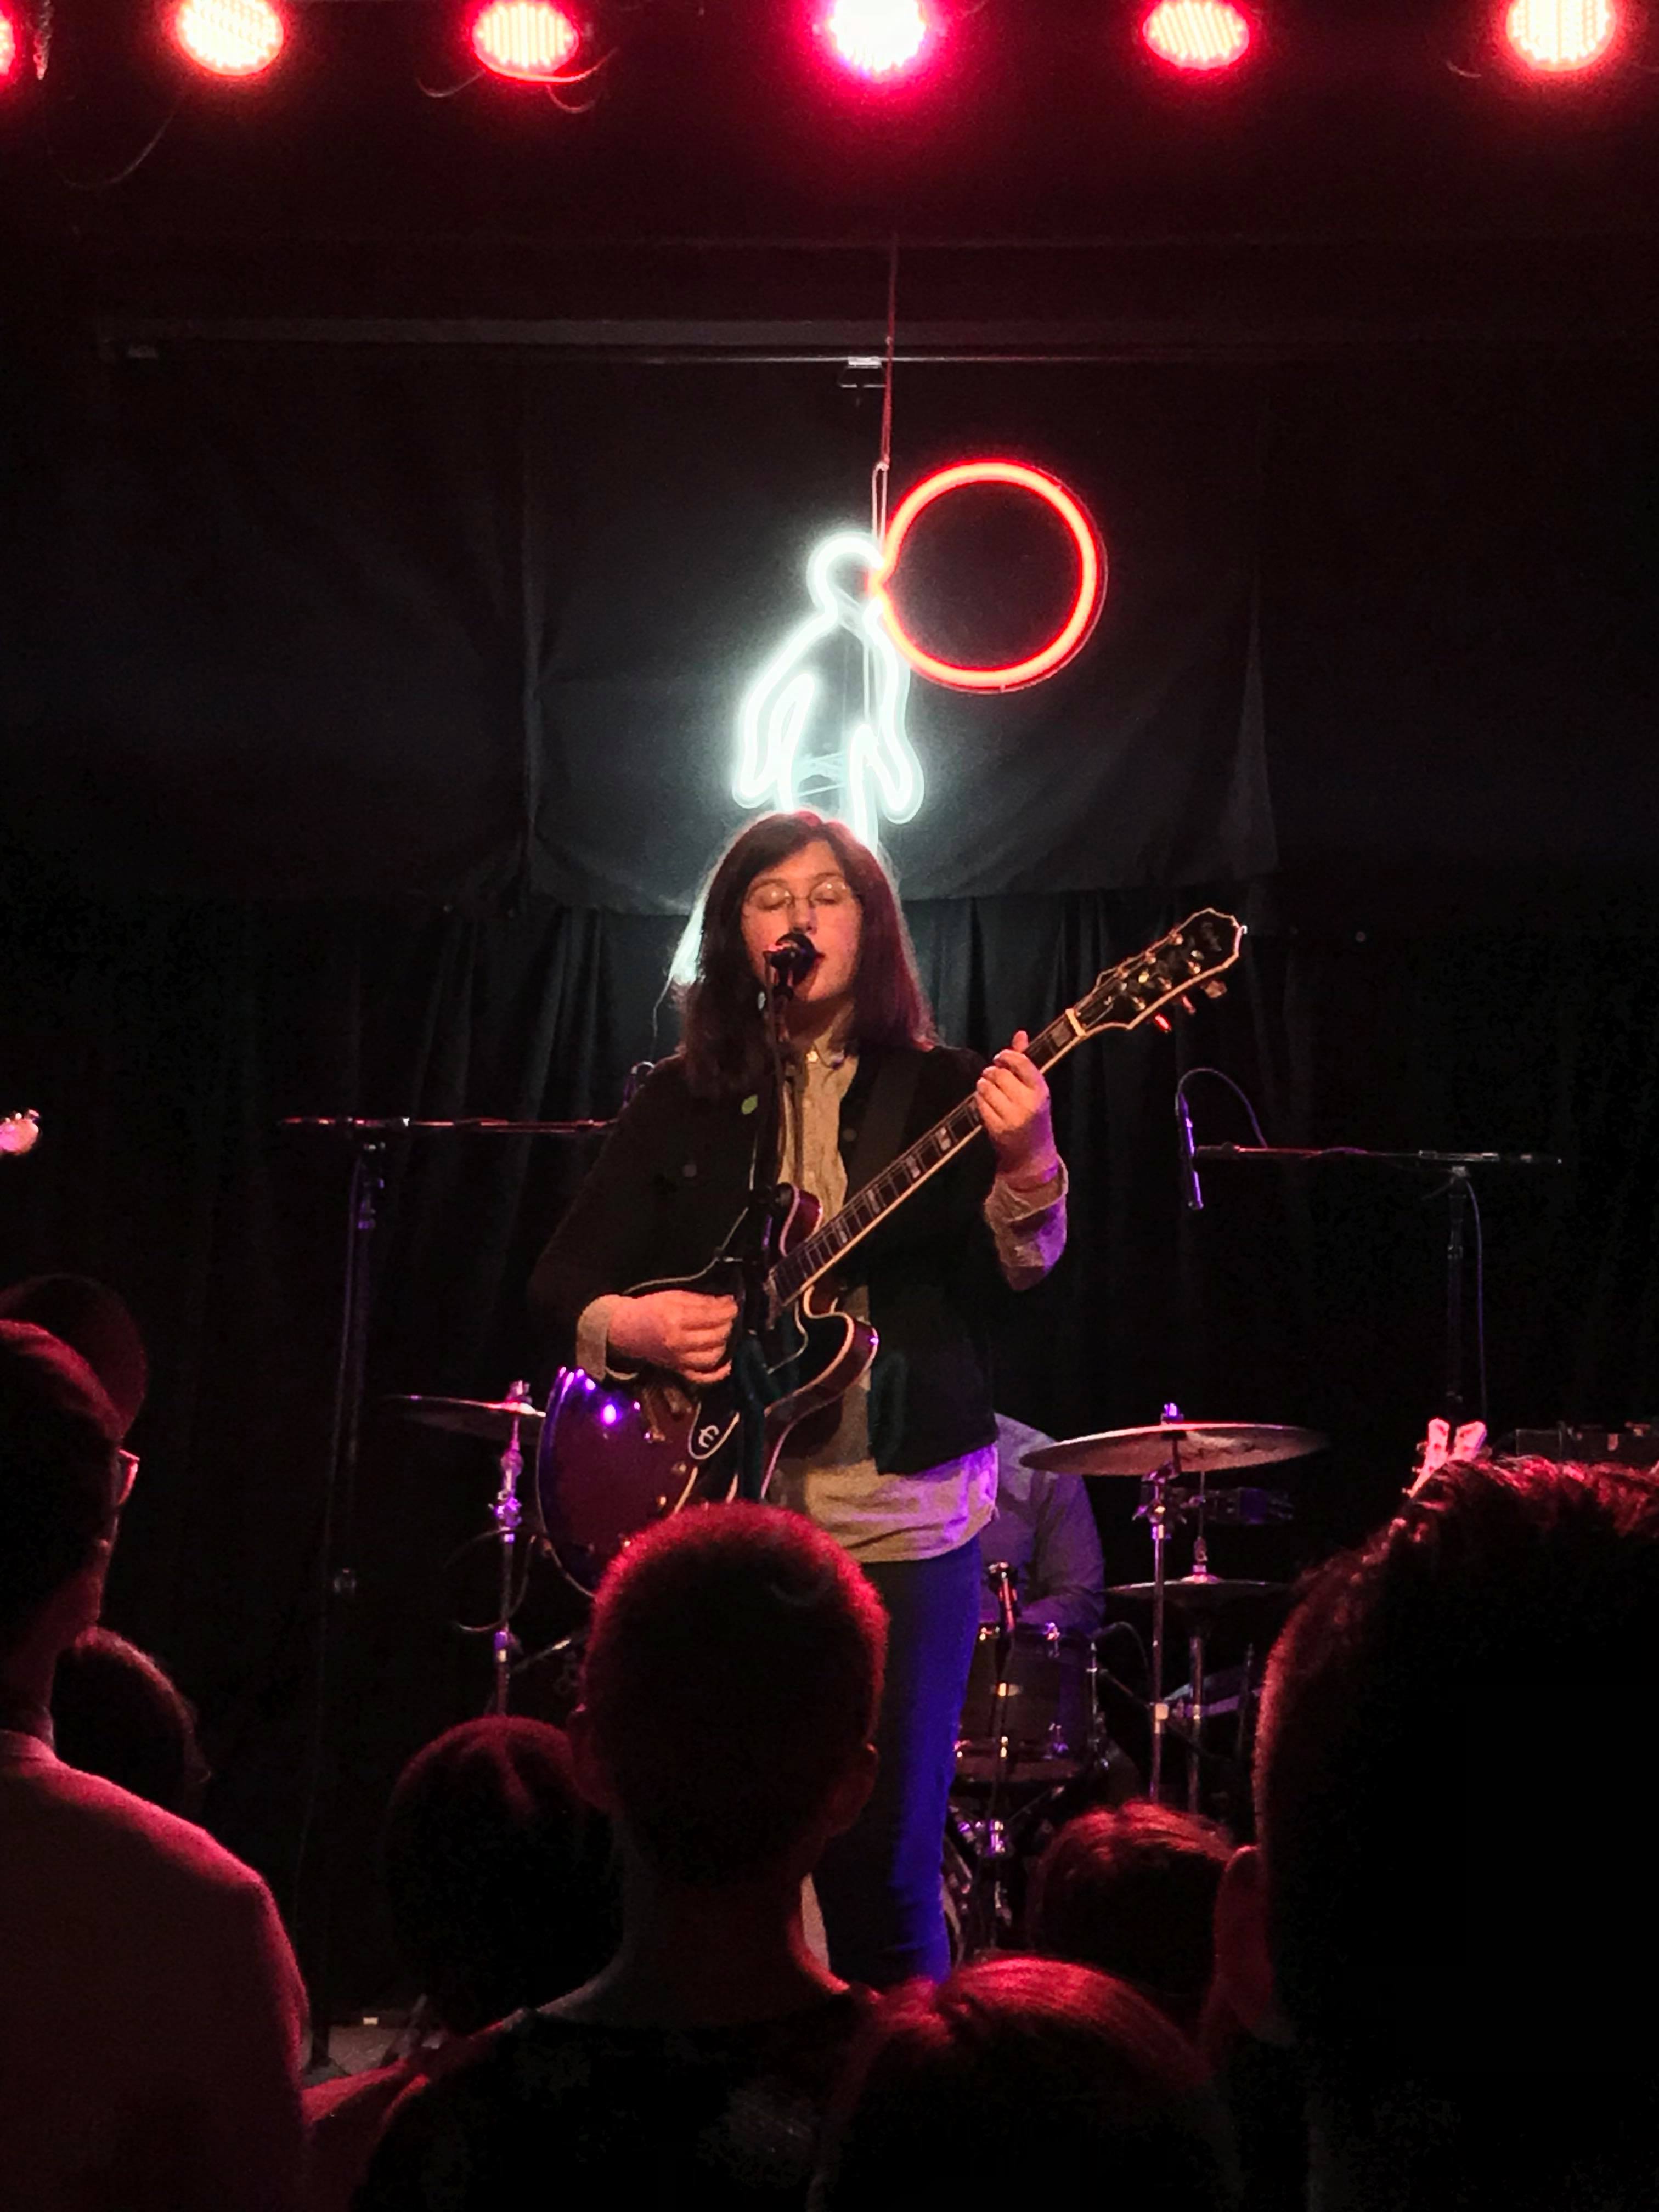 Lucy Dacus 'Night Shift' Will Be One Of 2018's Great Songs